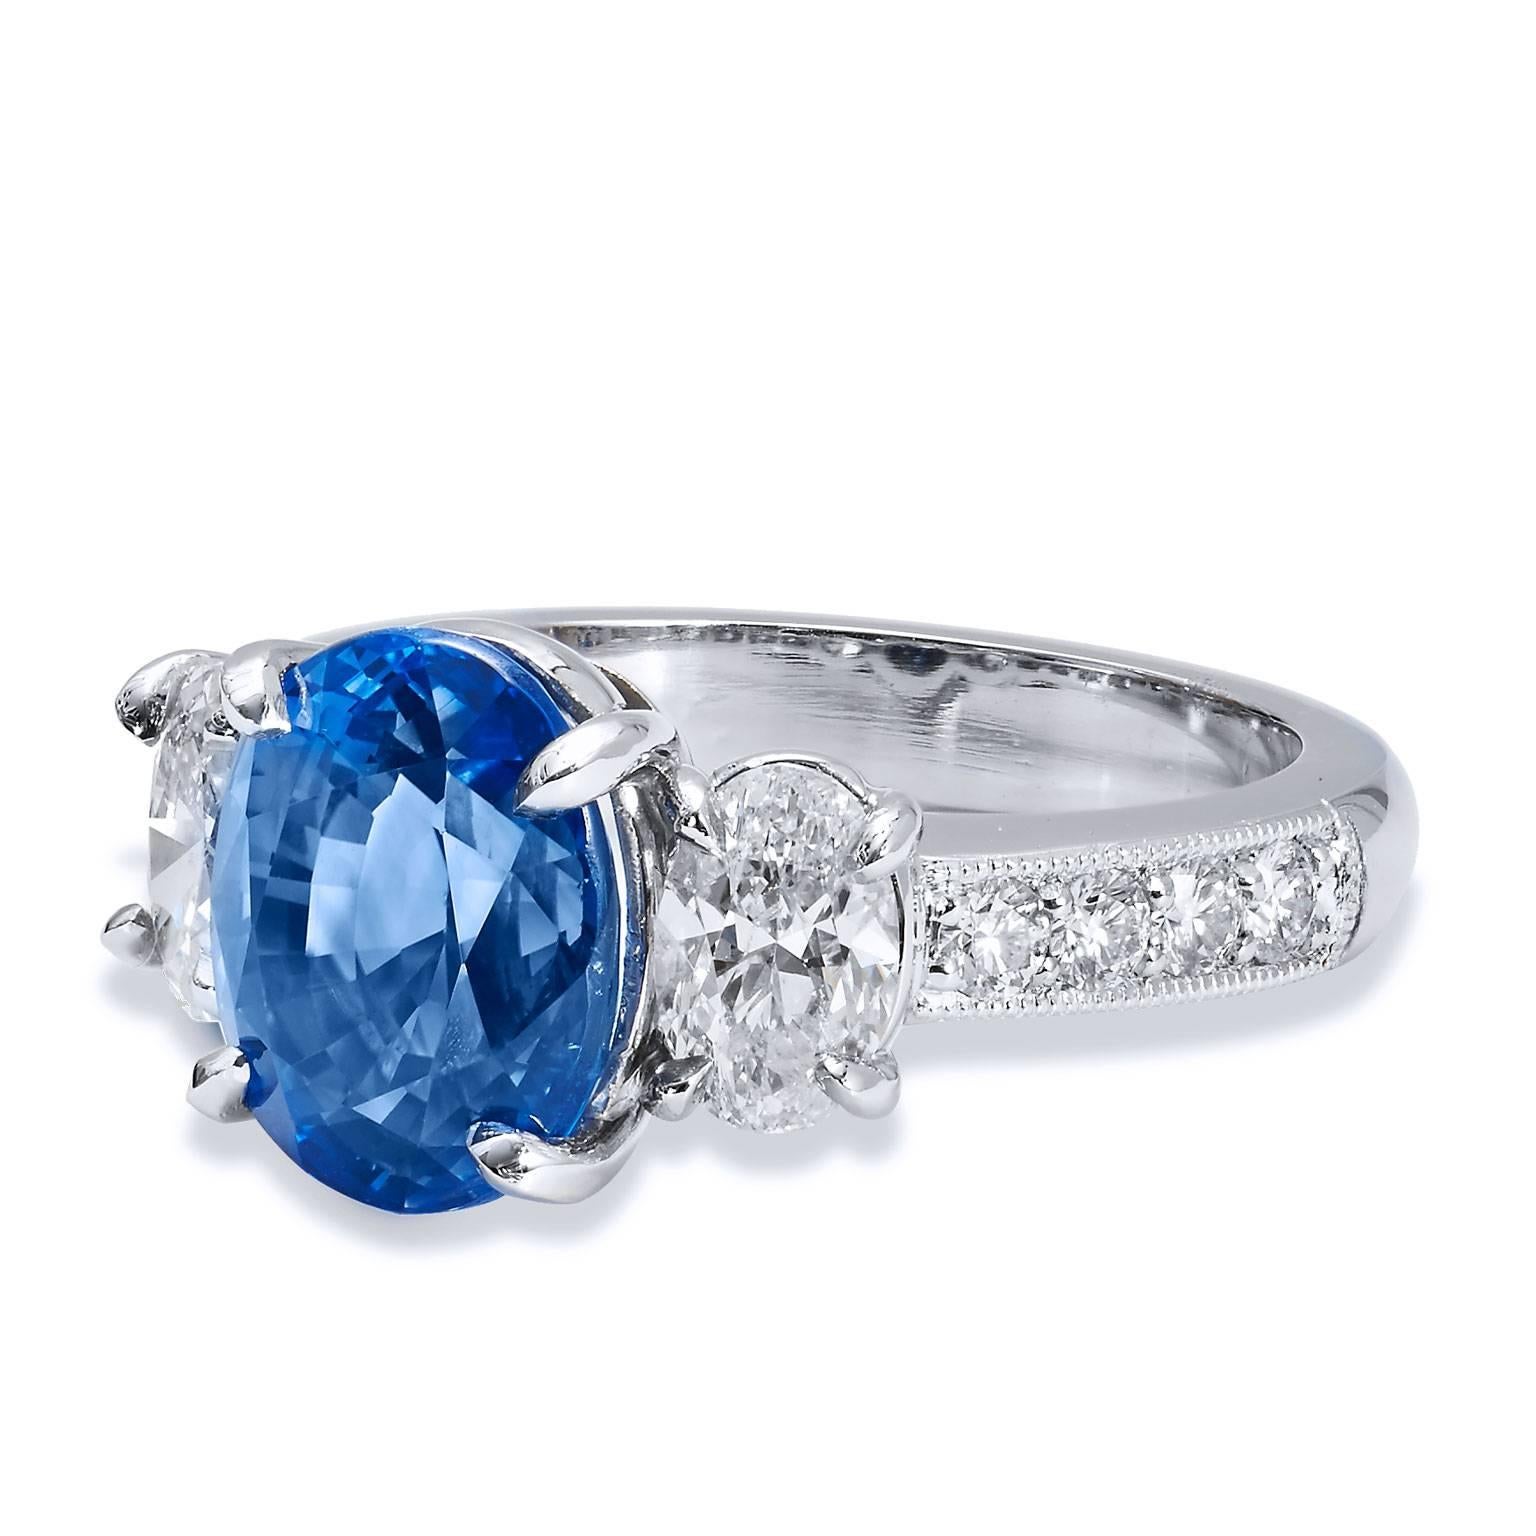 GIA Certified 4.32 Carat Madagascar Blue Sapphire and Diamond Platinum Ring

This is a stunning blue sapphire, diamond and platinum ring.  The center stone is a large 4.32 carat Madagascar blue sapphire and is set at center (GIA #2131250291), while